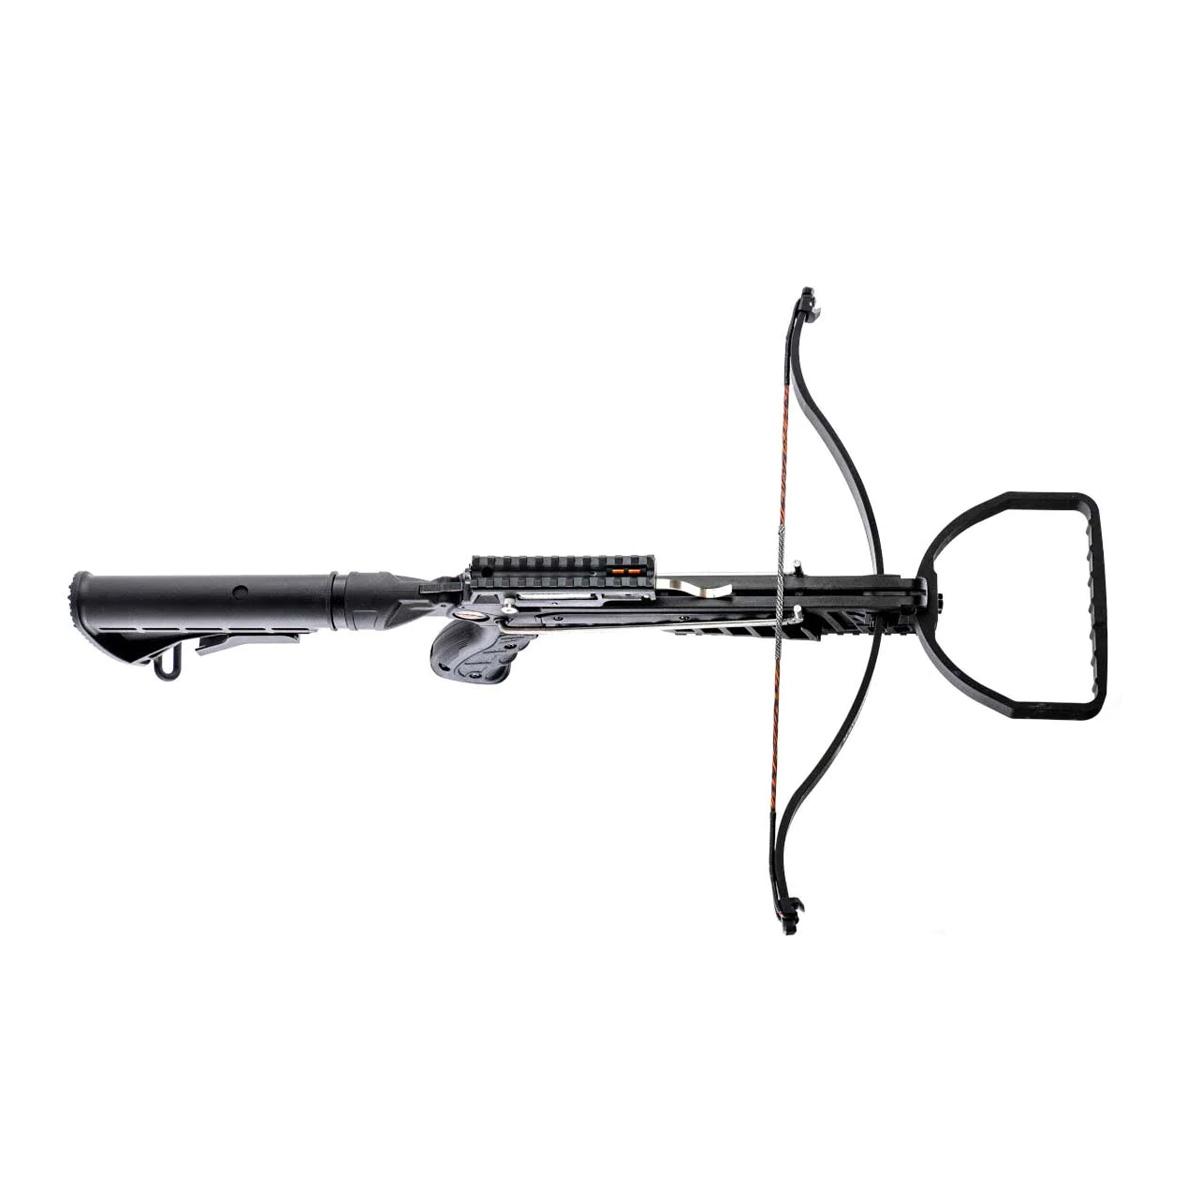 Steambow AR-6 Stinger II Survival Recurve Crossbow 